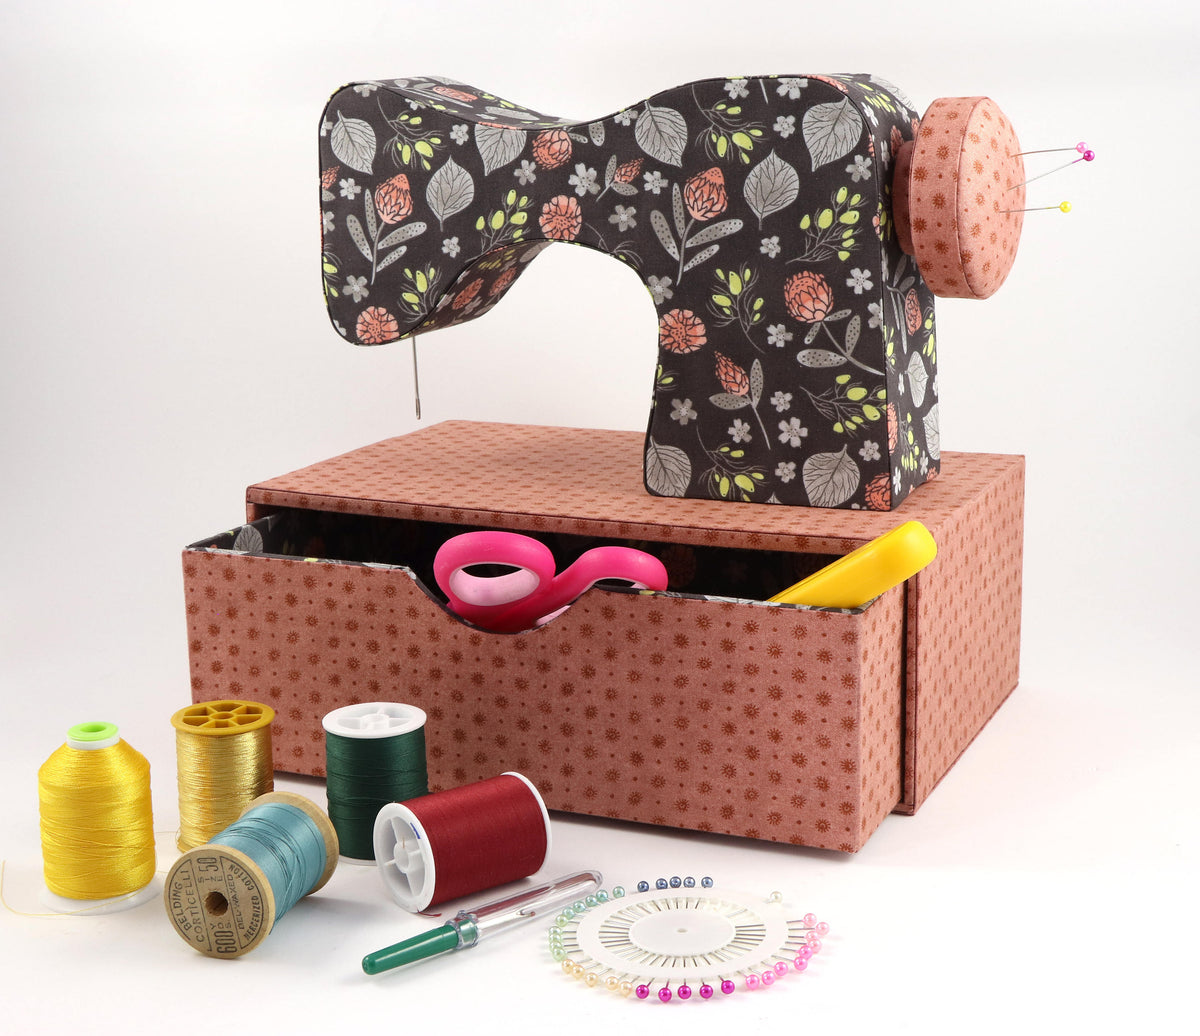 Fabric sewing machine DIY kit, cartonnage kit 150, diy fabric sewing machine with drawer, online instructions included - Colorway Arts